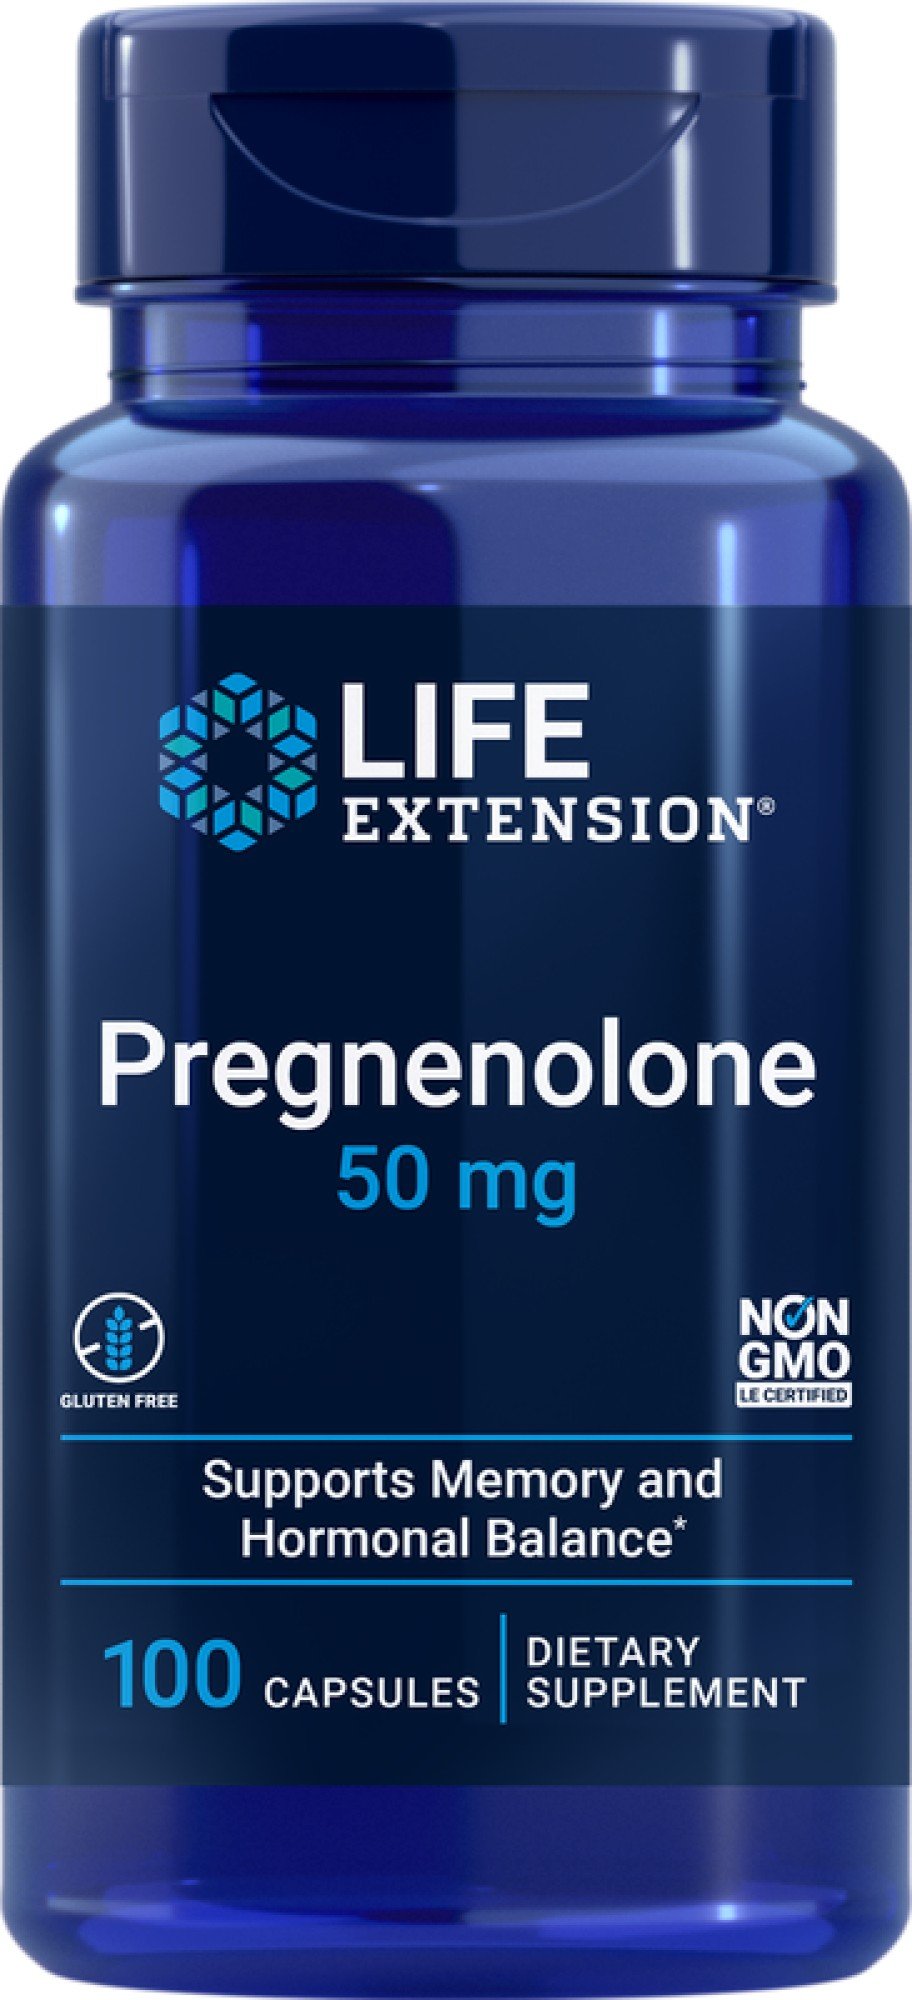 Life Extension Pregnenolone 50mg 100 Capsule